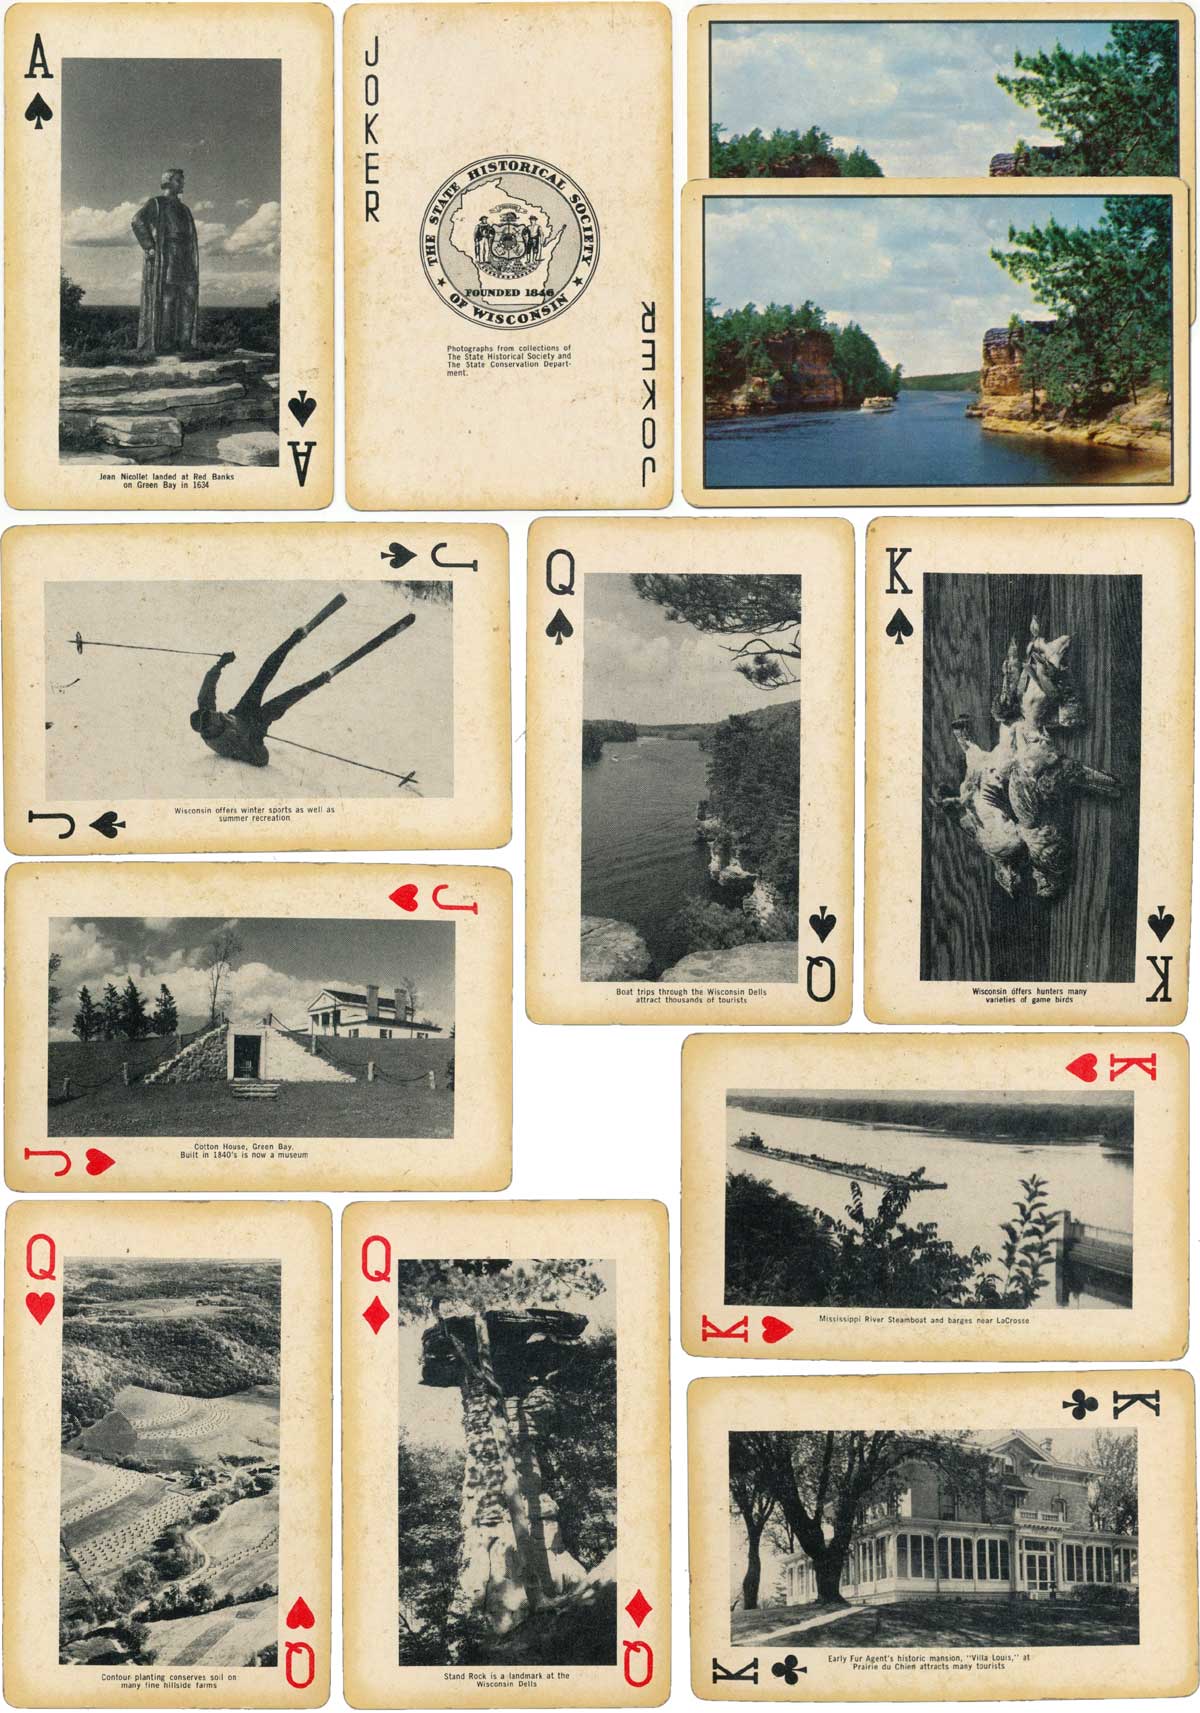 Souvenir deck from the State Historical Society of Wisconsin, c.1946